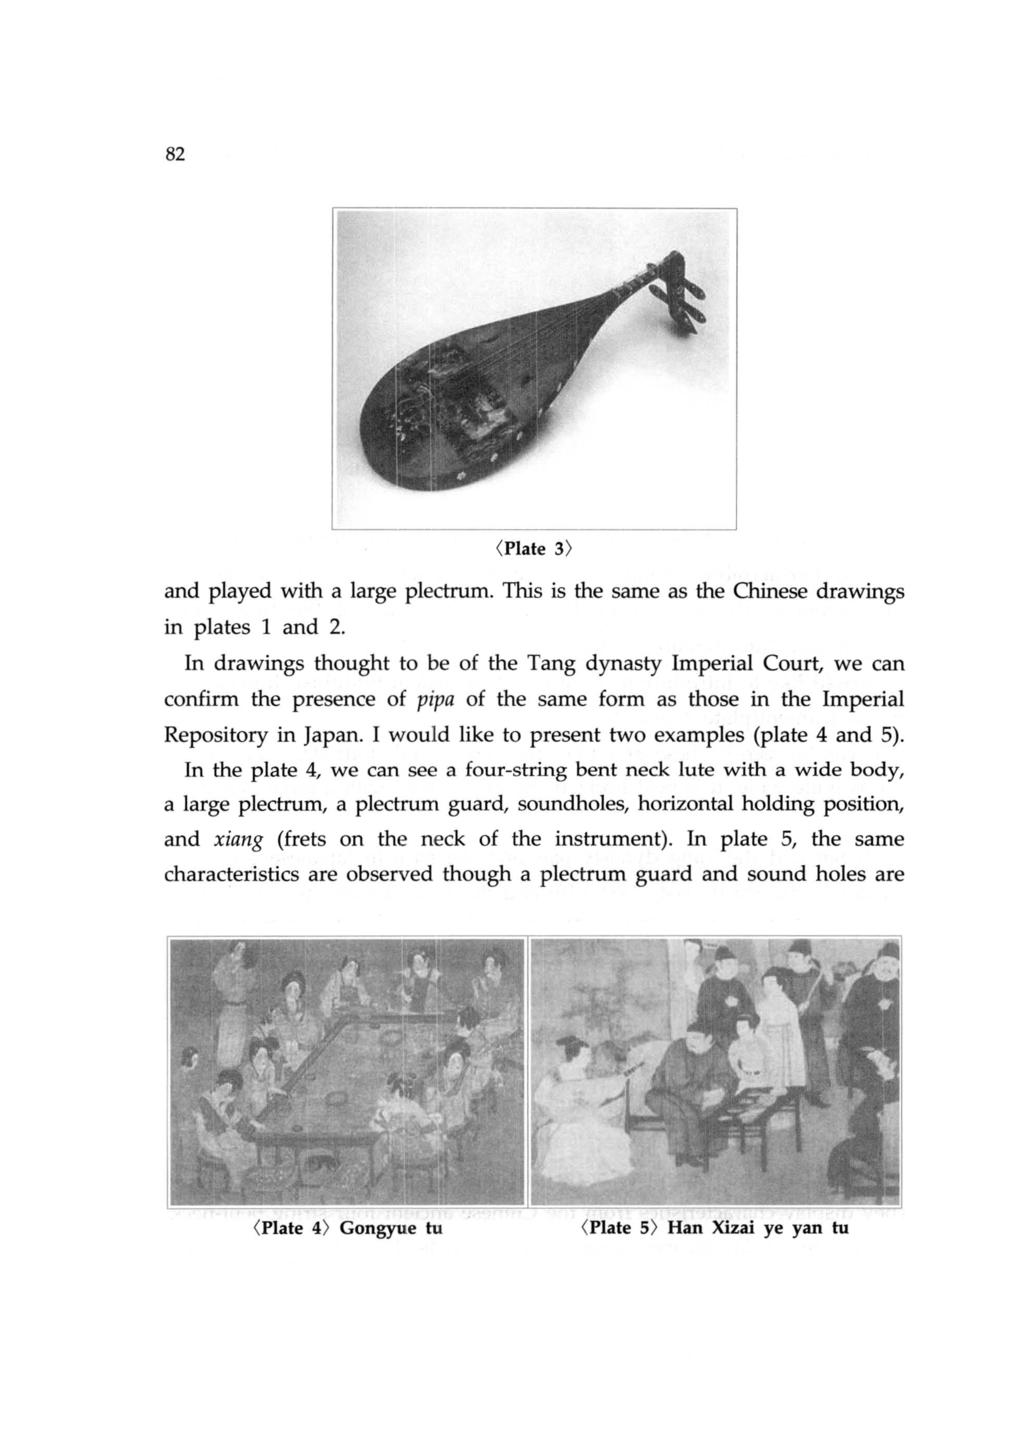 82 (Plate 3) and played with a large plectrum. This is the same as the Chinese drawings in plates 1 and 2.